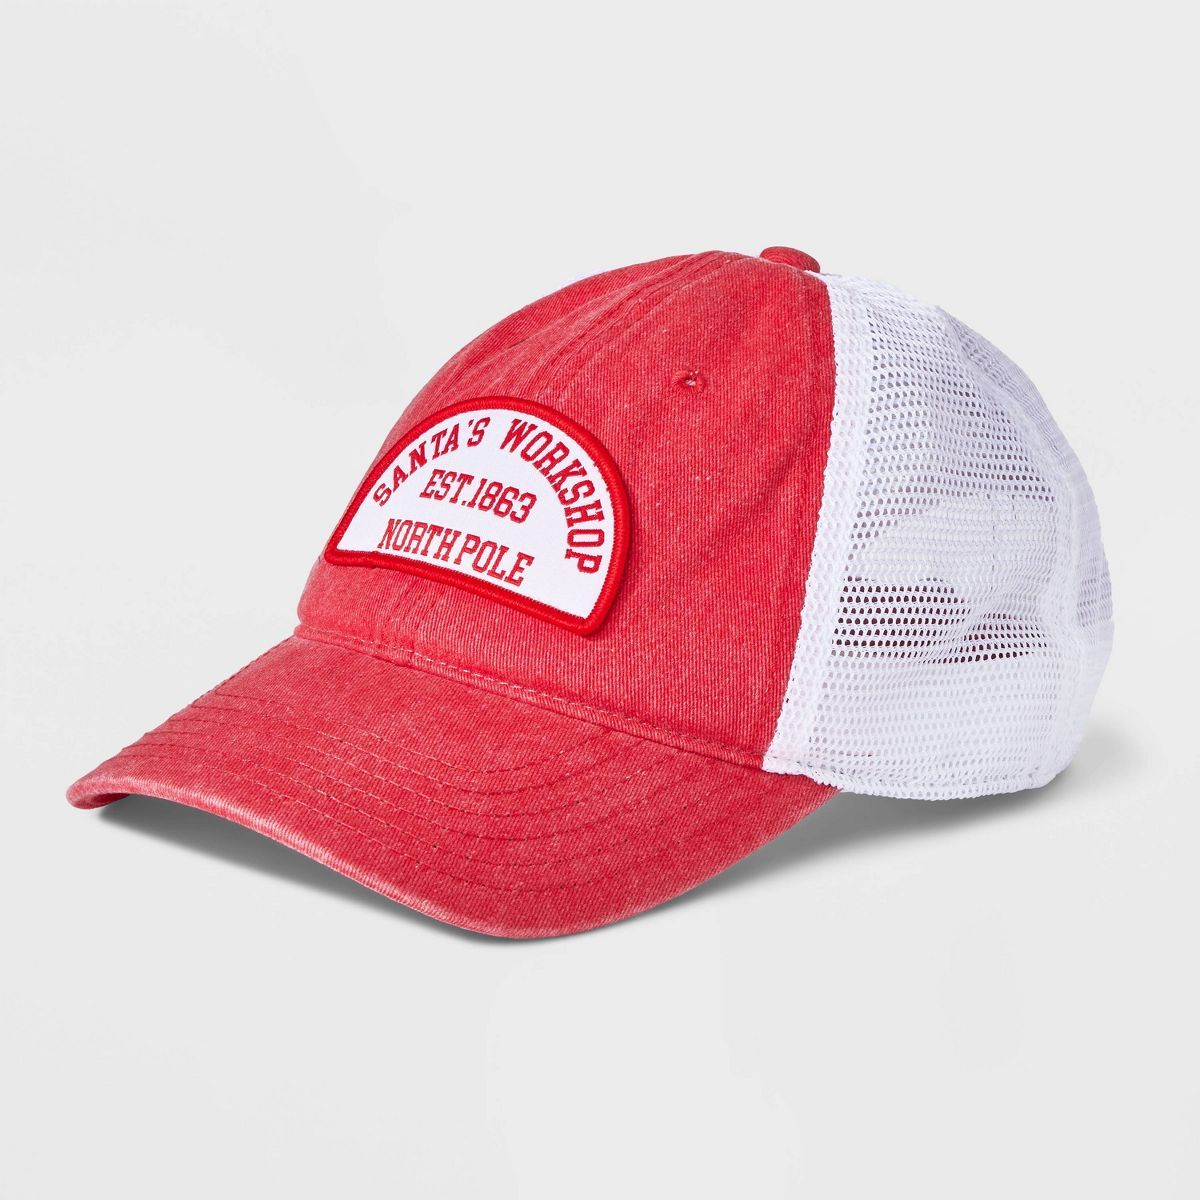 North Pole Trucker Hat - Mighty Fine Red | Target